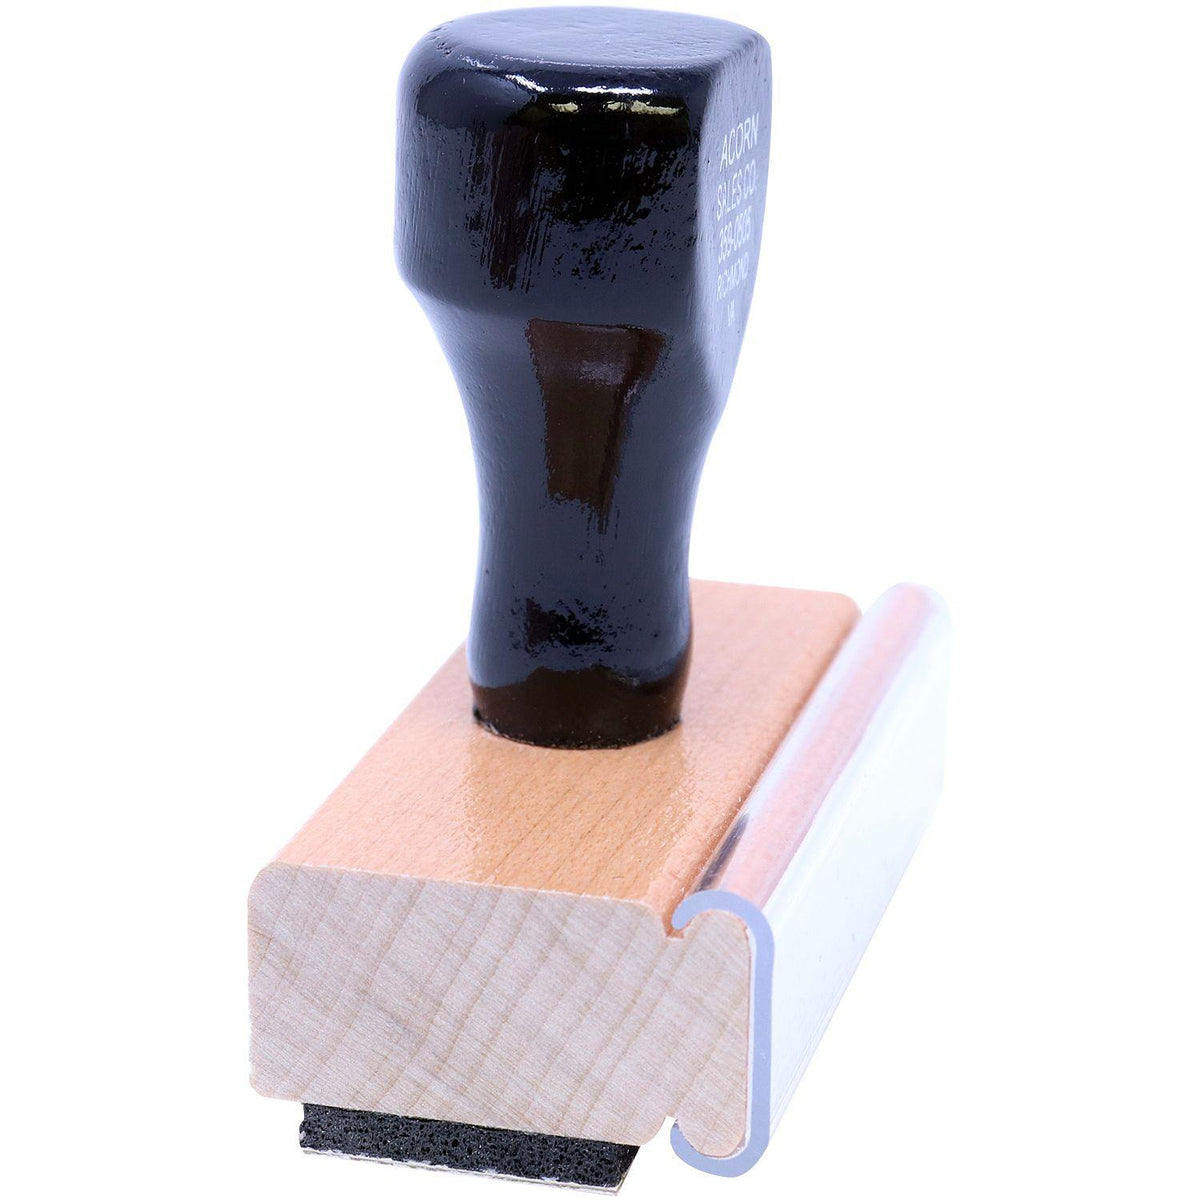 Side View of Air Mail Rubber Stamp at an Angle